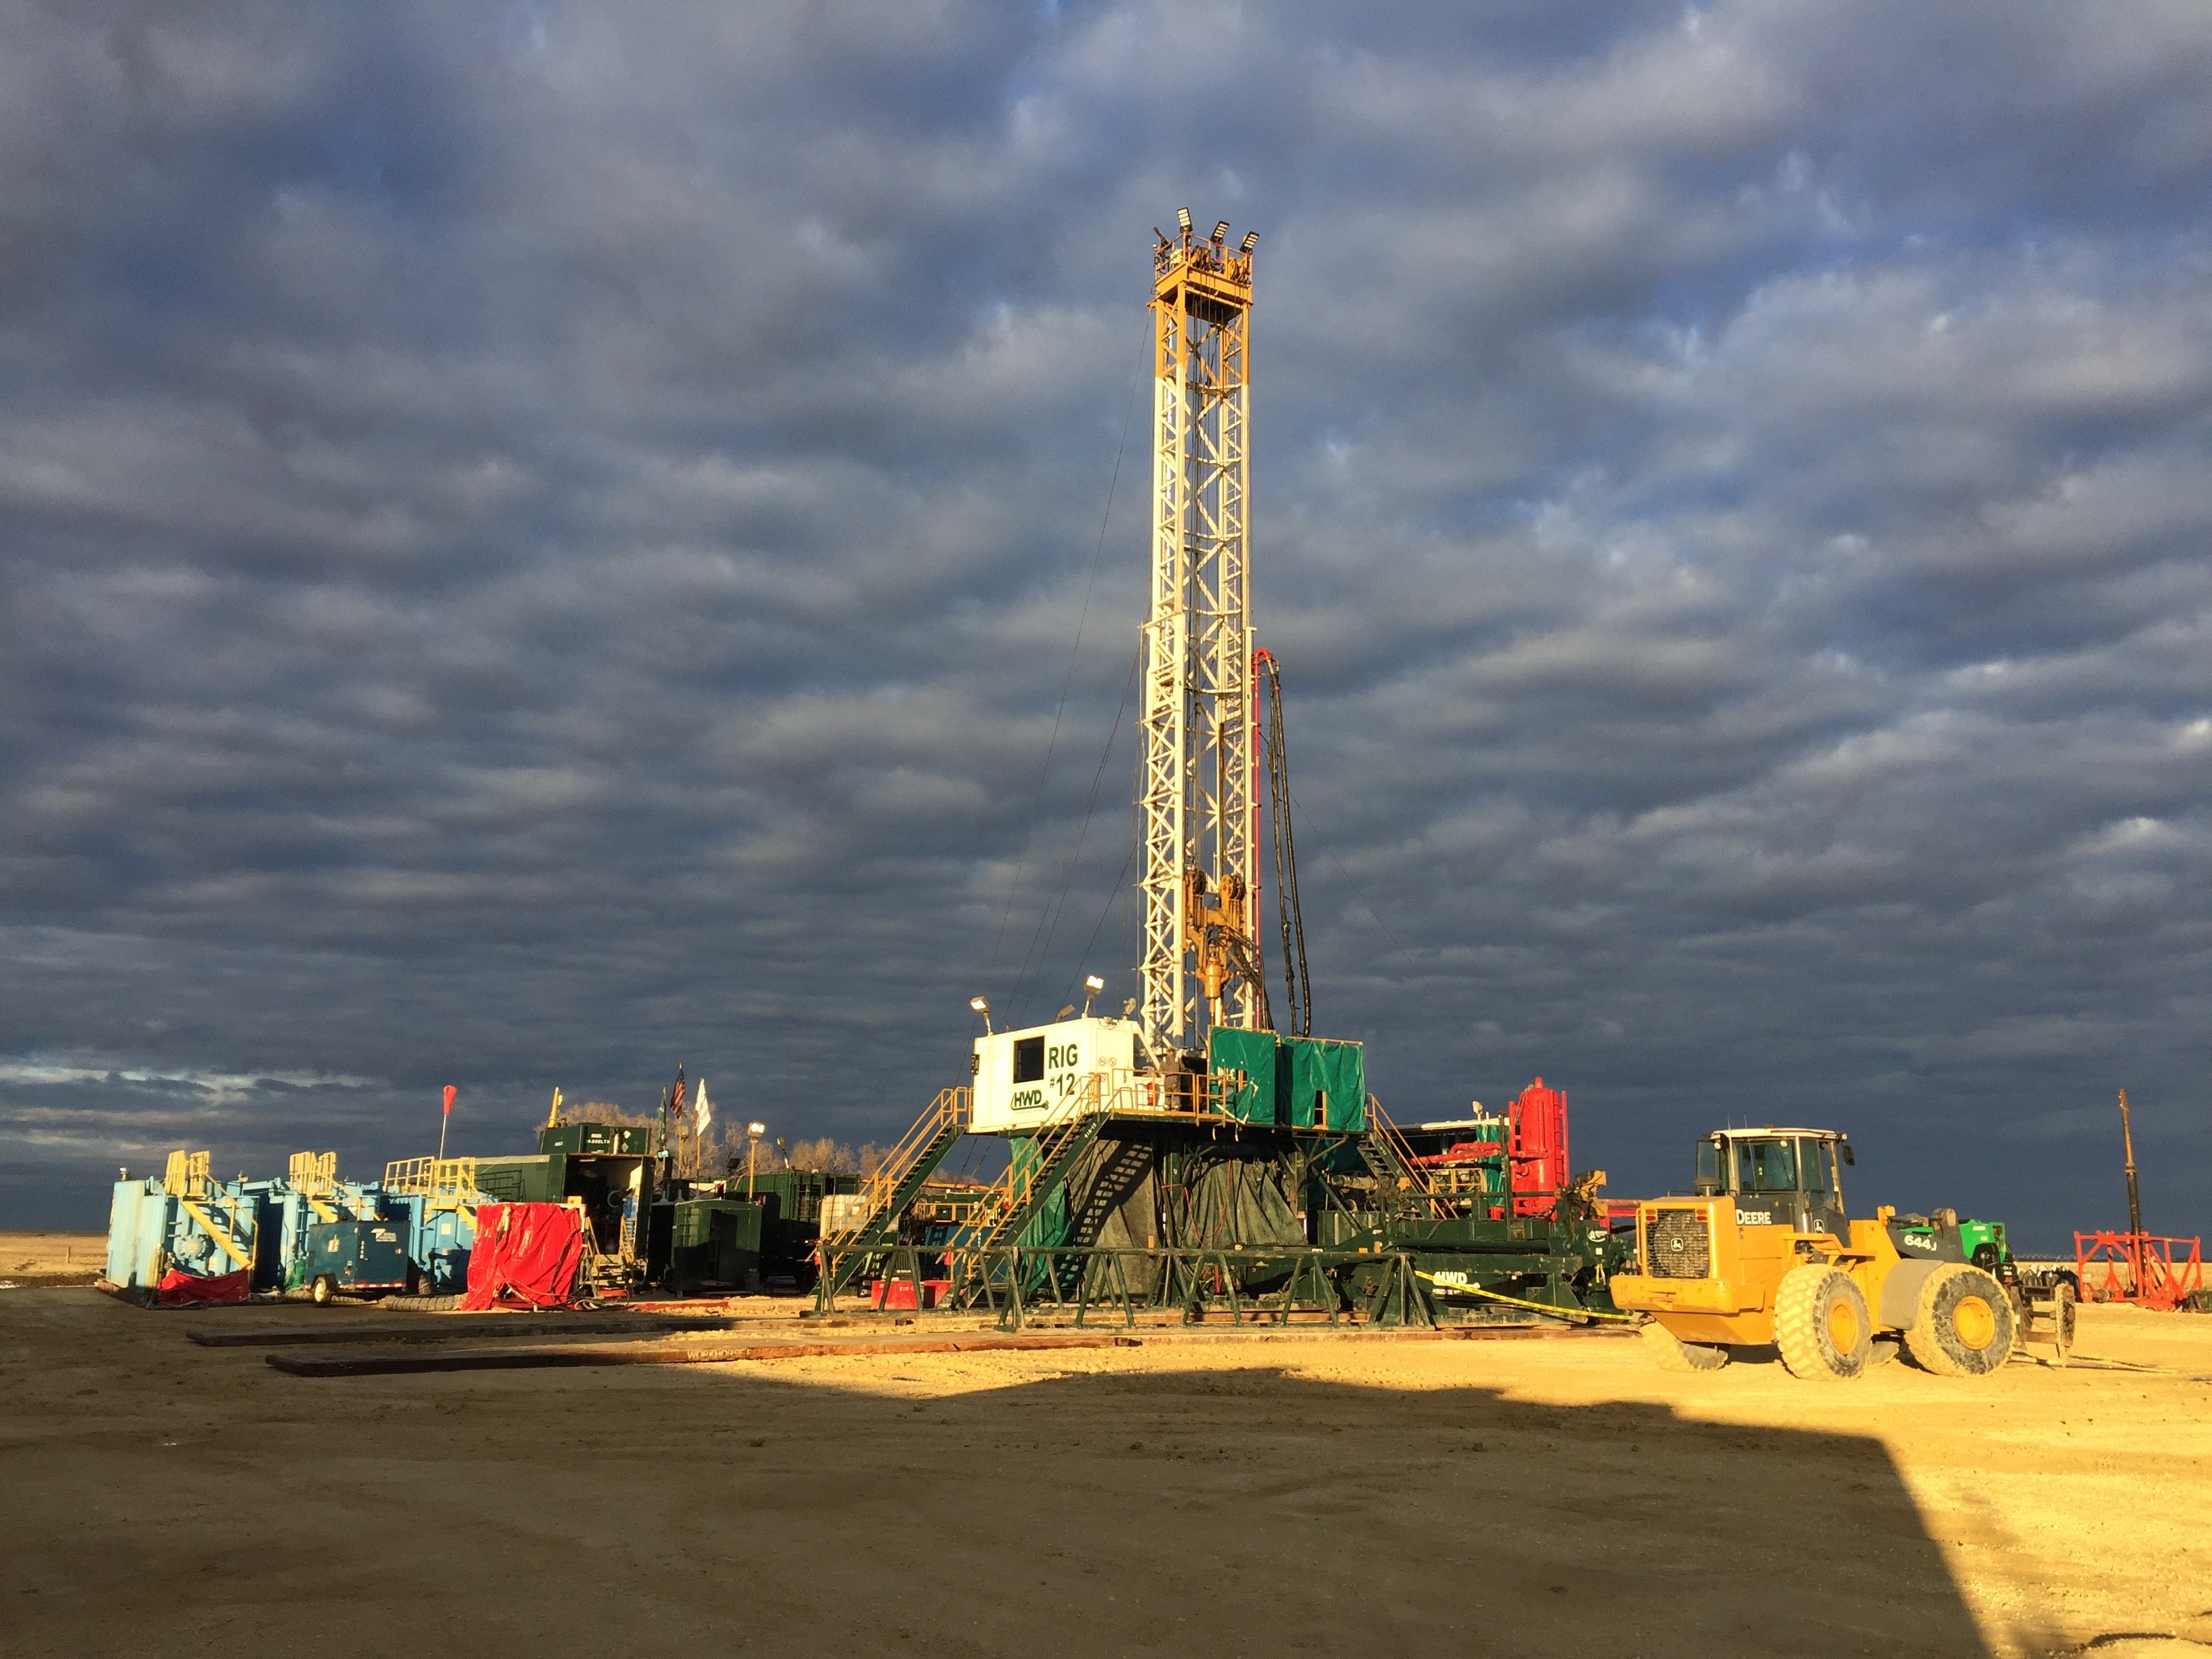 The drilling operations of Natural Hydrogen Energy LLC in Nebraska. In 2019, the company established its first hydrogen borehole